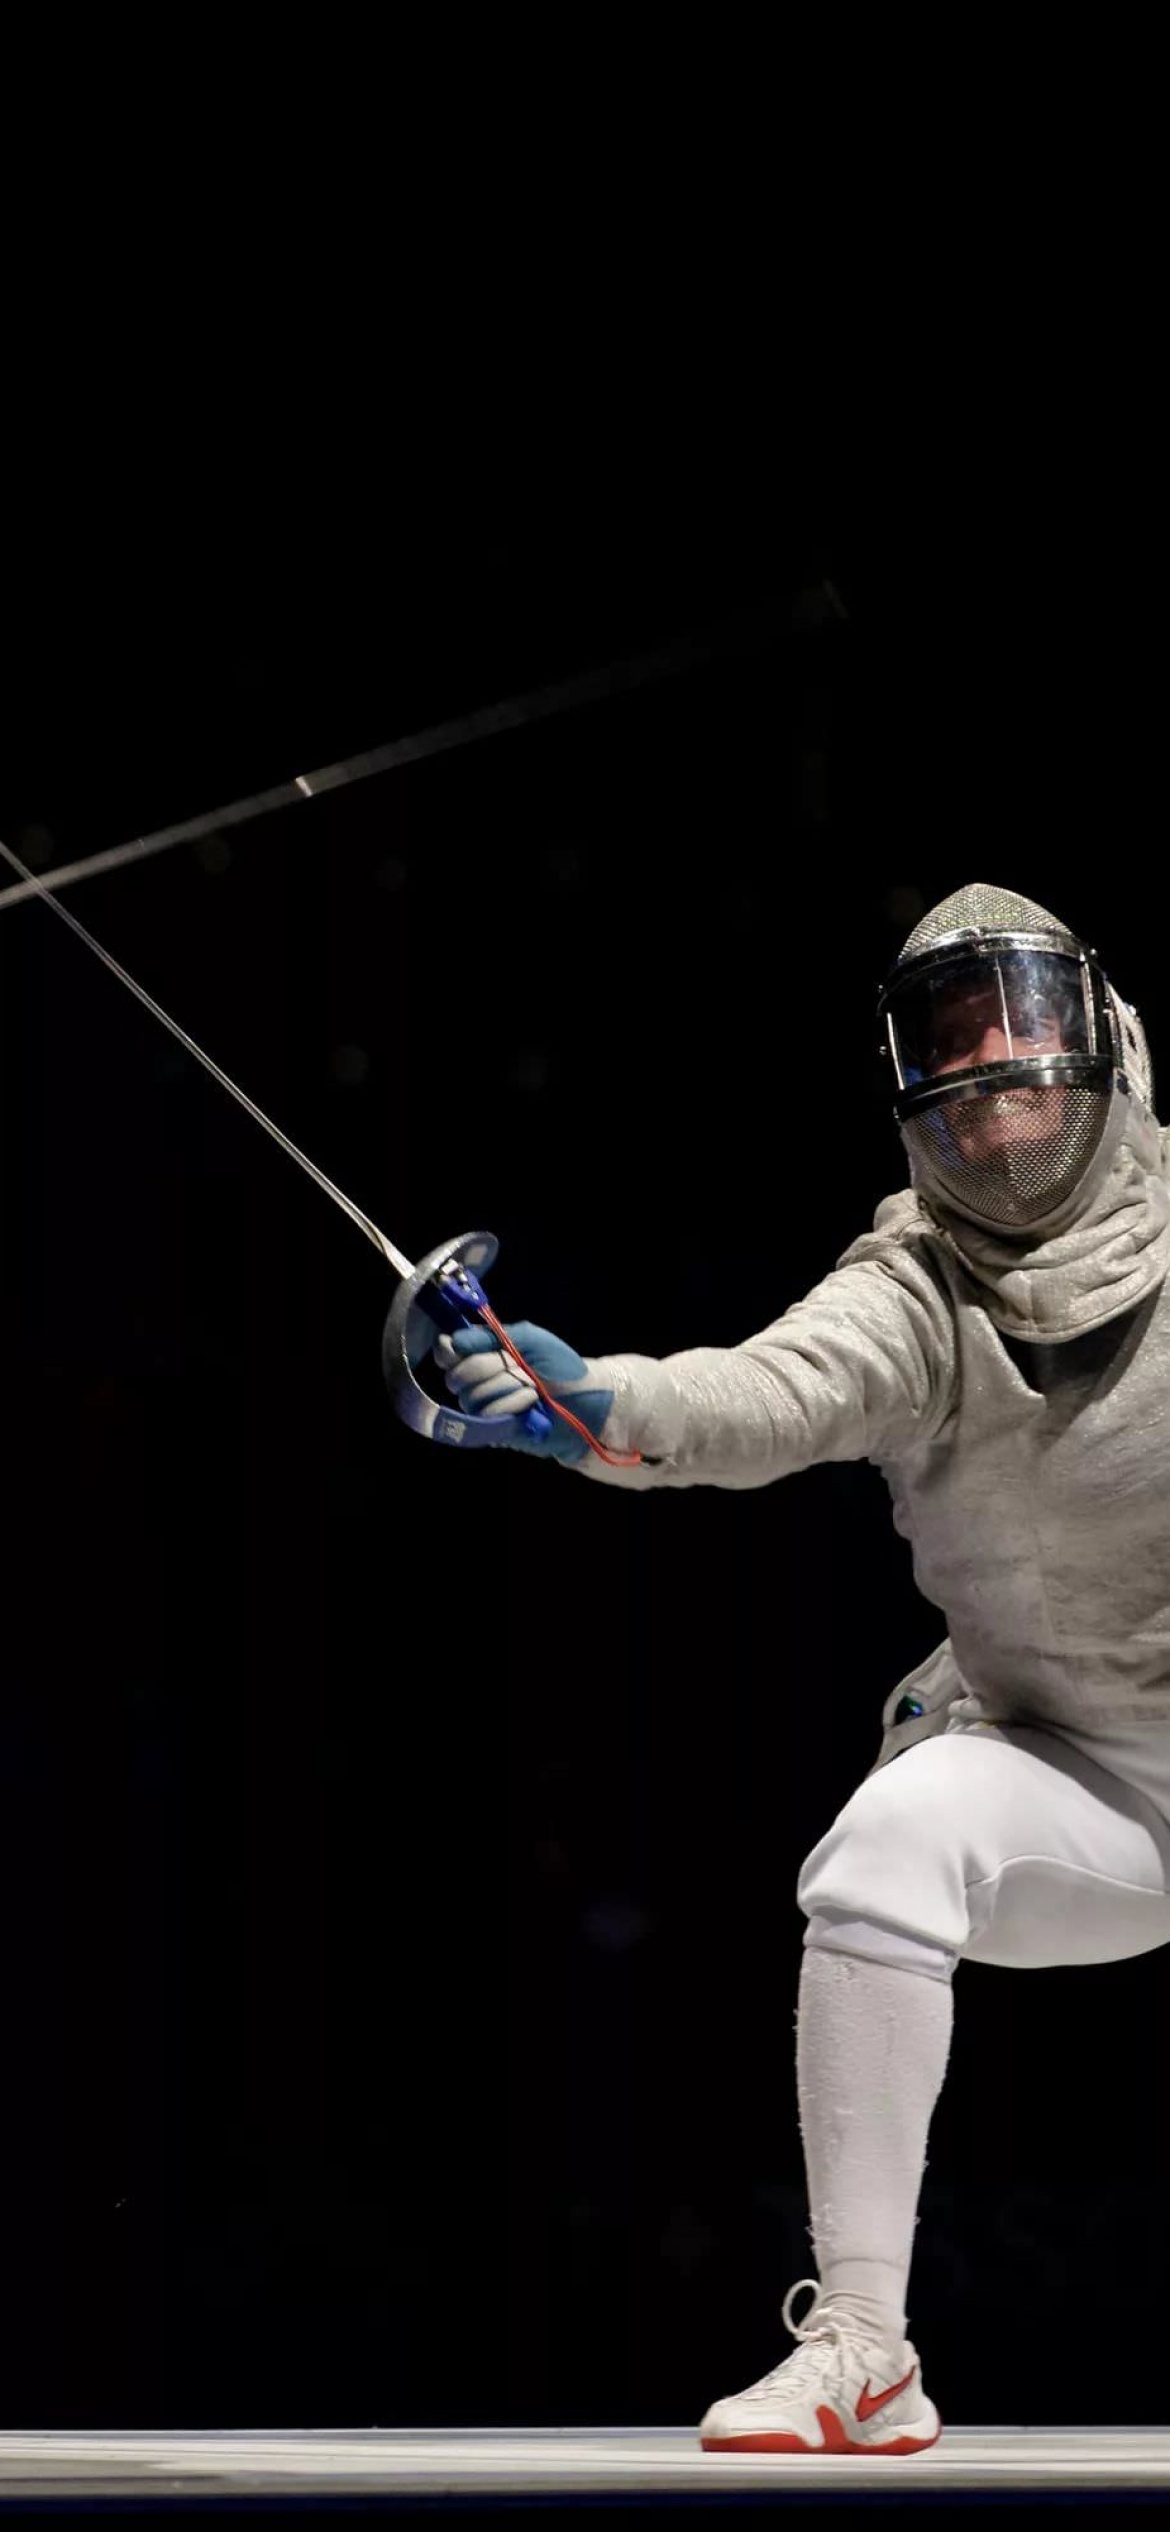 Fencing: Saber-style duel, Thrusting and cutting combat sports discipline. 1170x2540 HD Background.